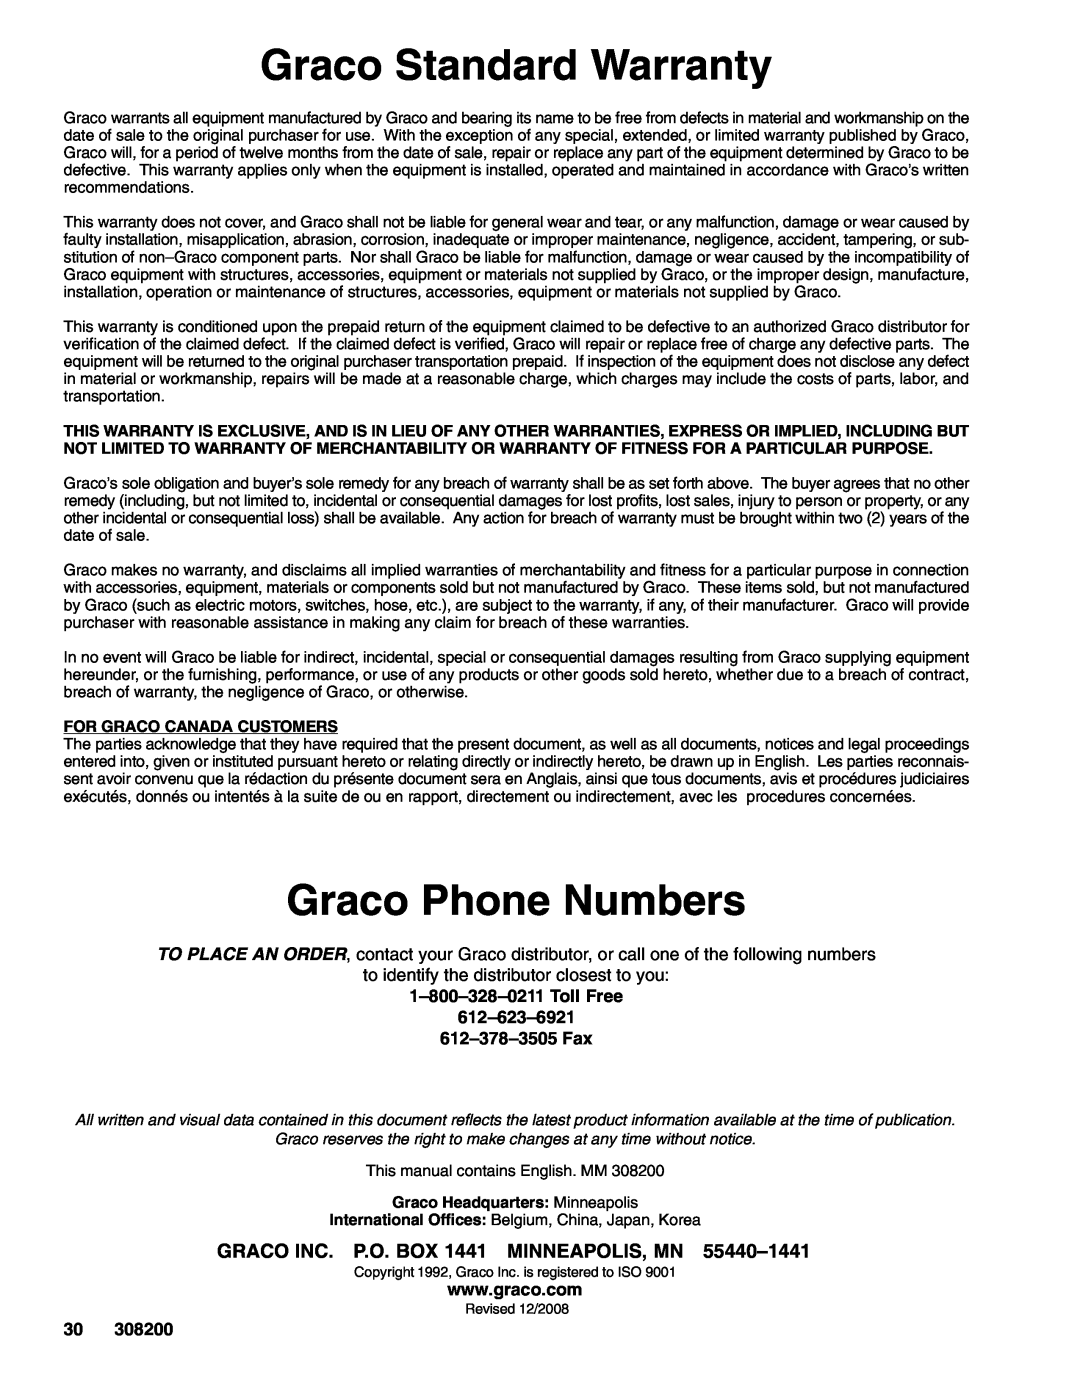 Graco 222907 Series A, 222839 Series A dimensions Graco Standard Warranty, Graco Phone Numbers, 612–378–3505Fax 